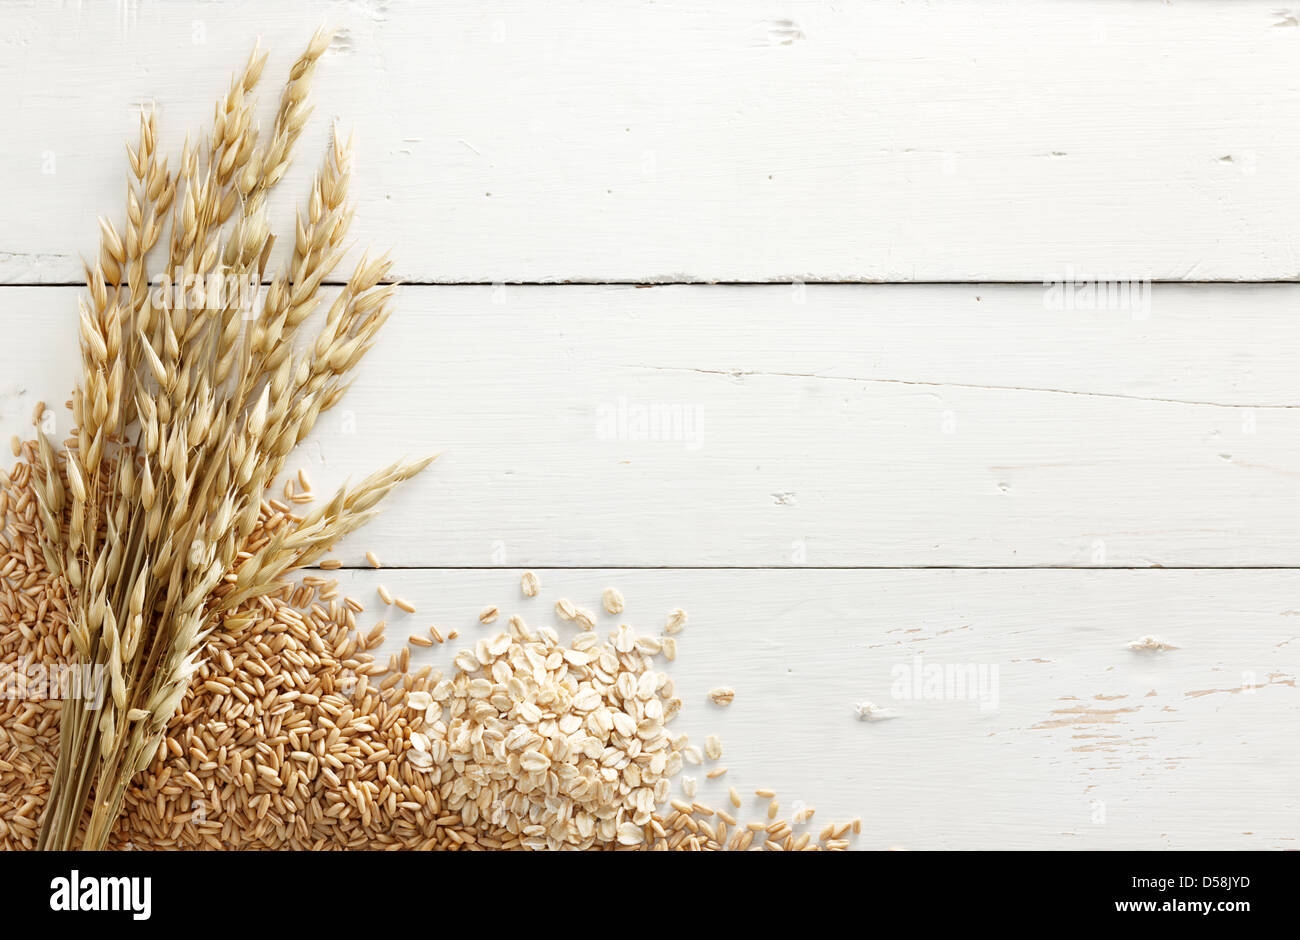 oats with its processed and unprocessed grains against white wood background Stock Photo